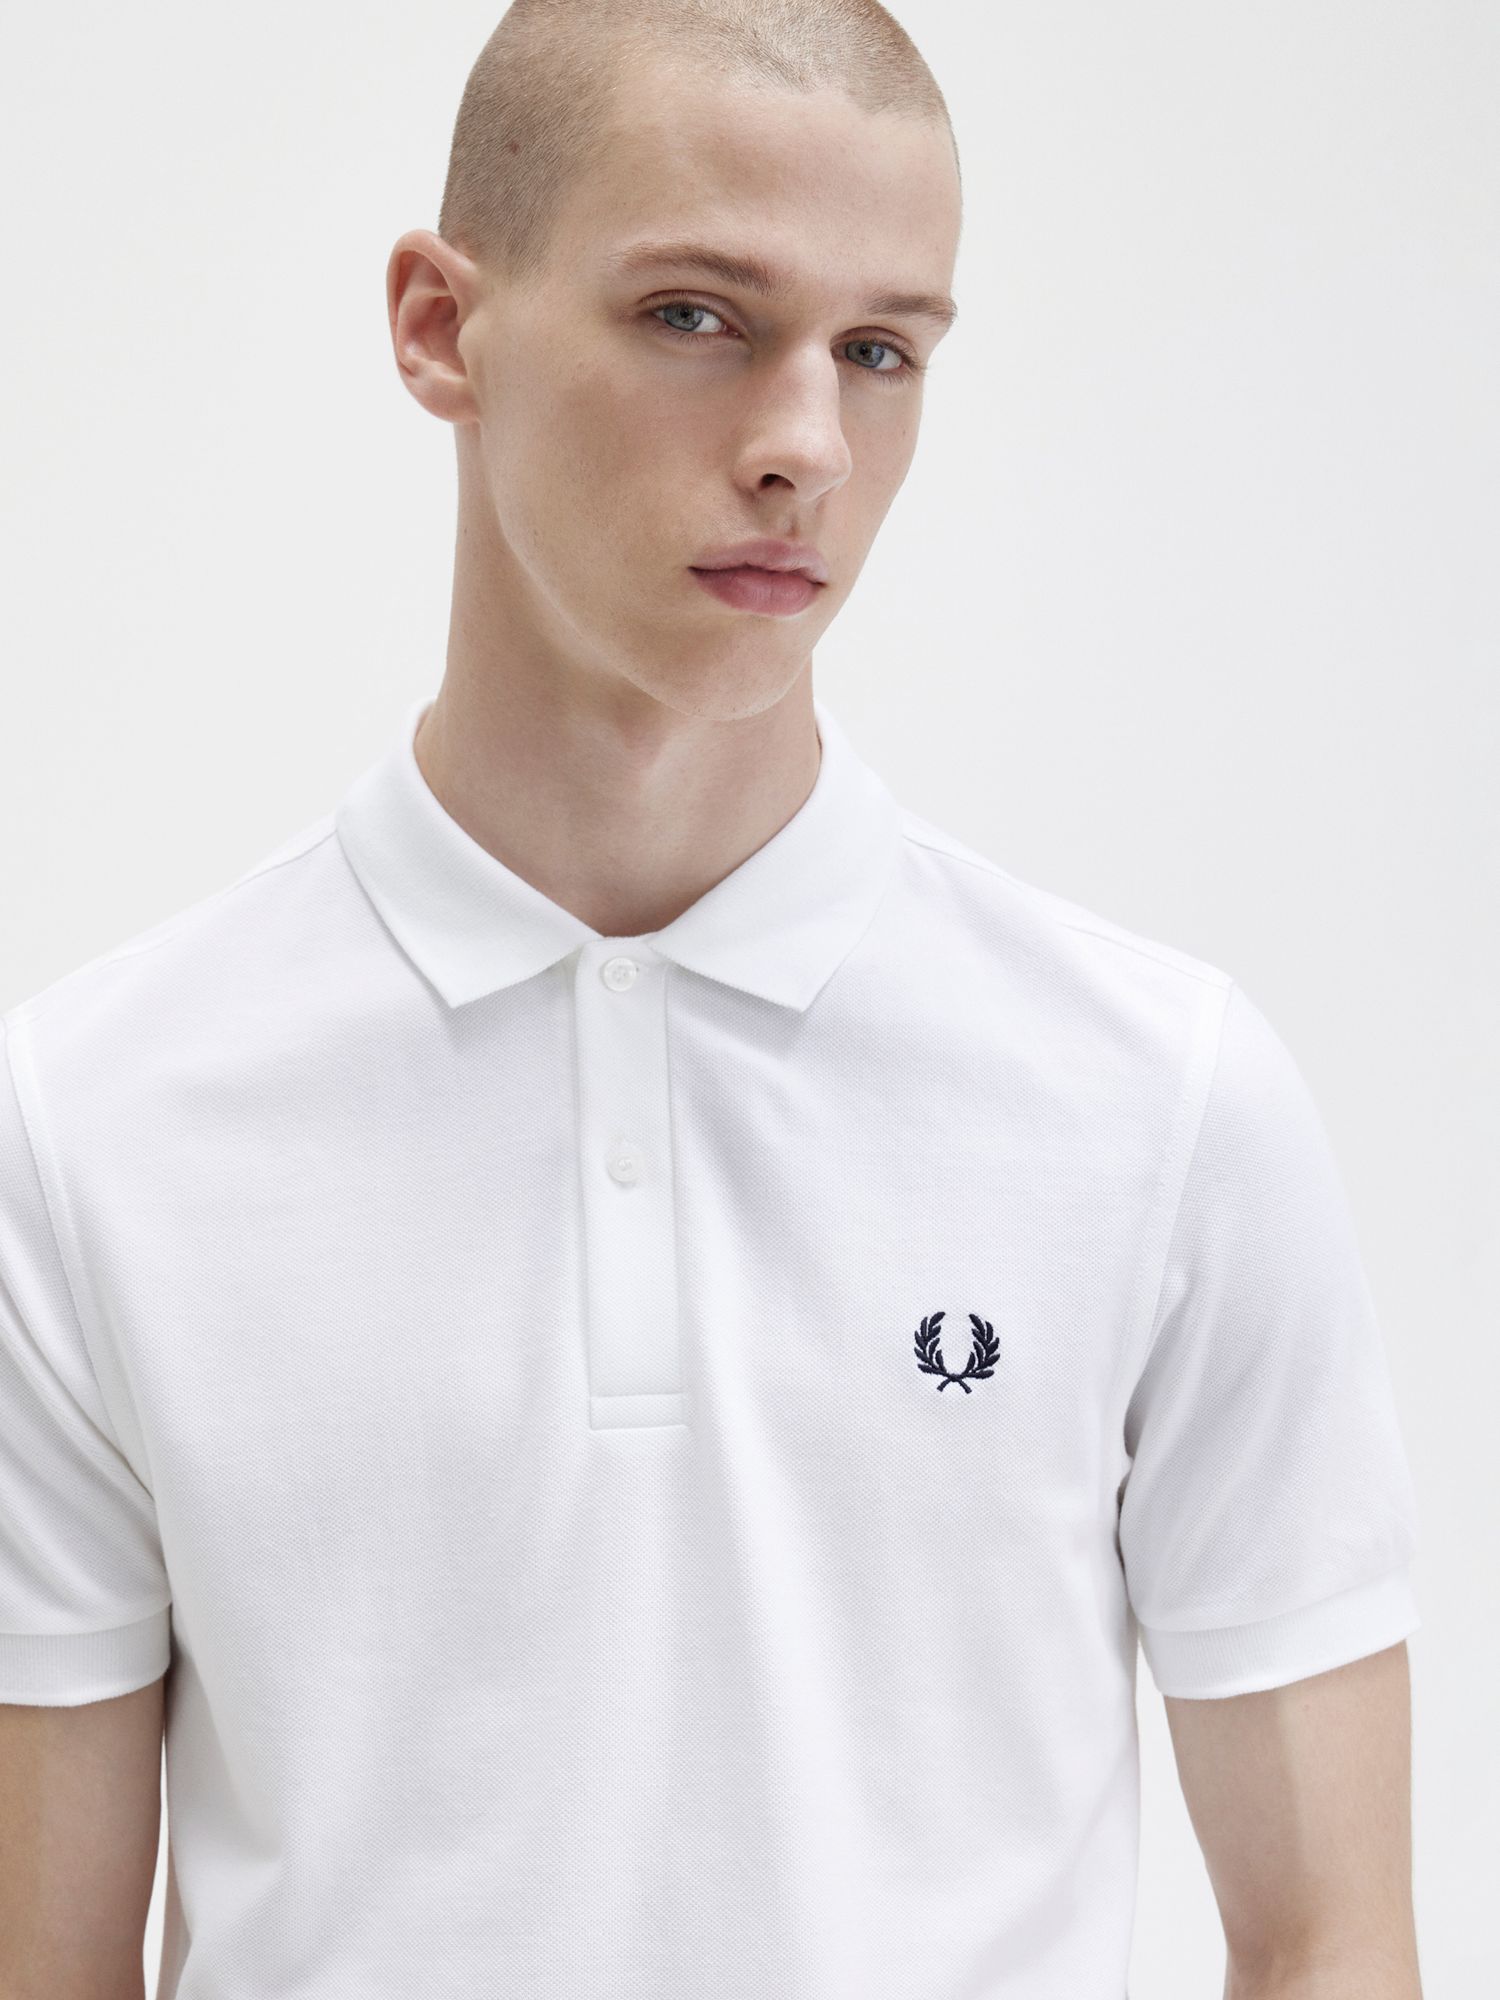 Fred Perry Plain Regular Fit Polo Shirt, White, S